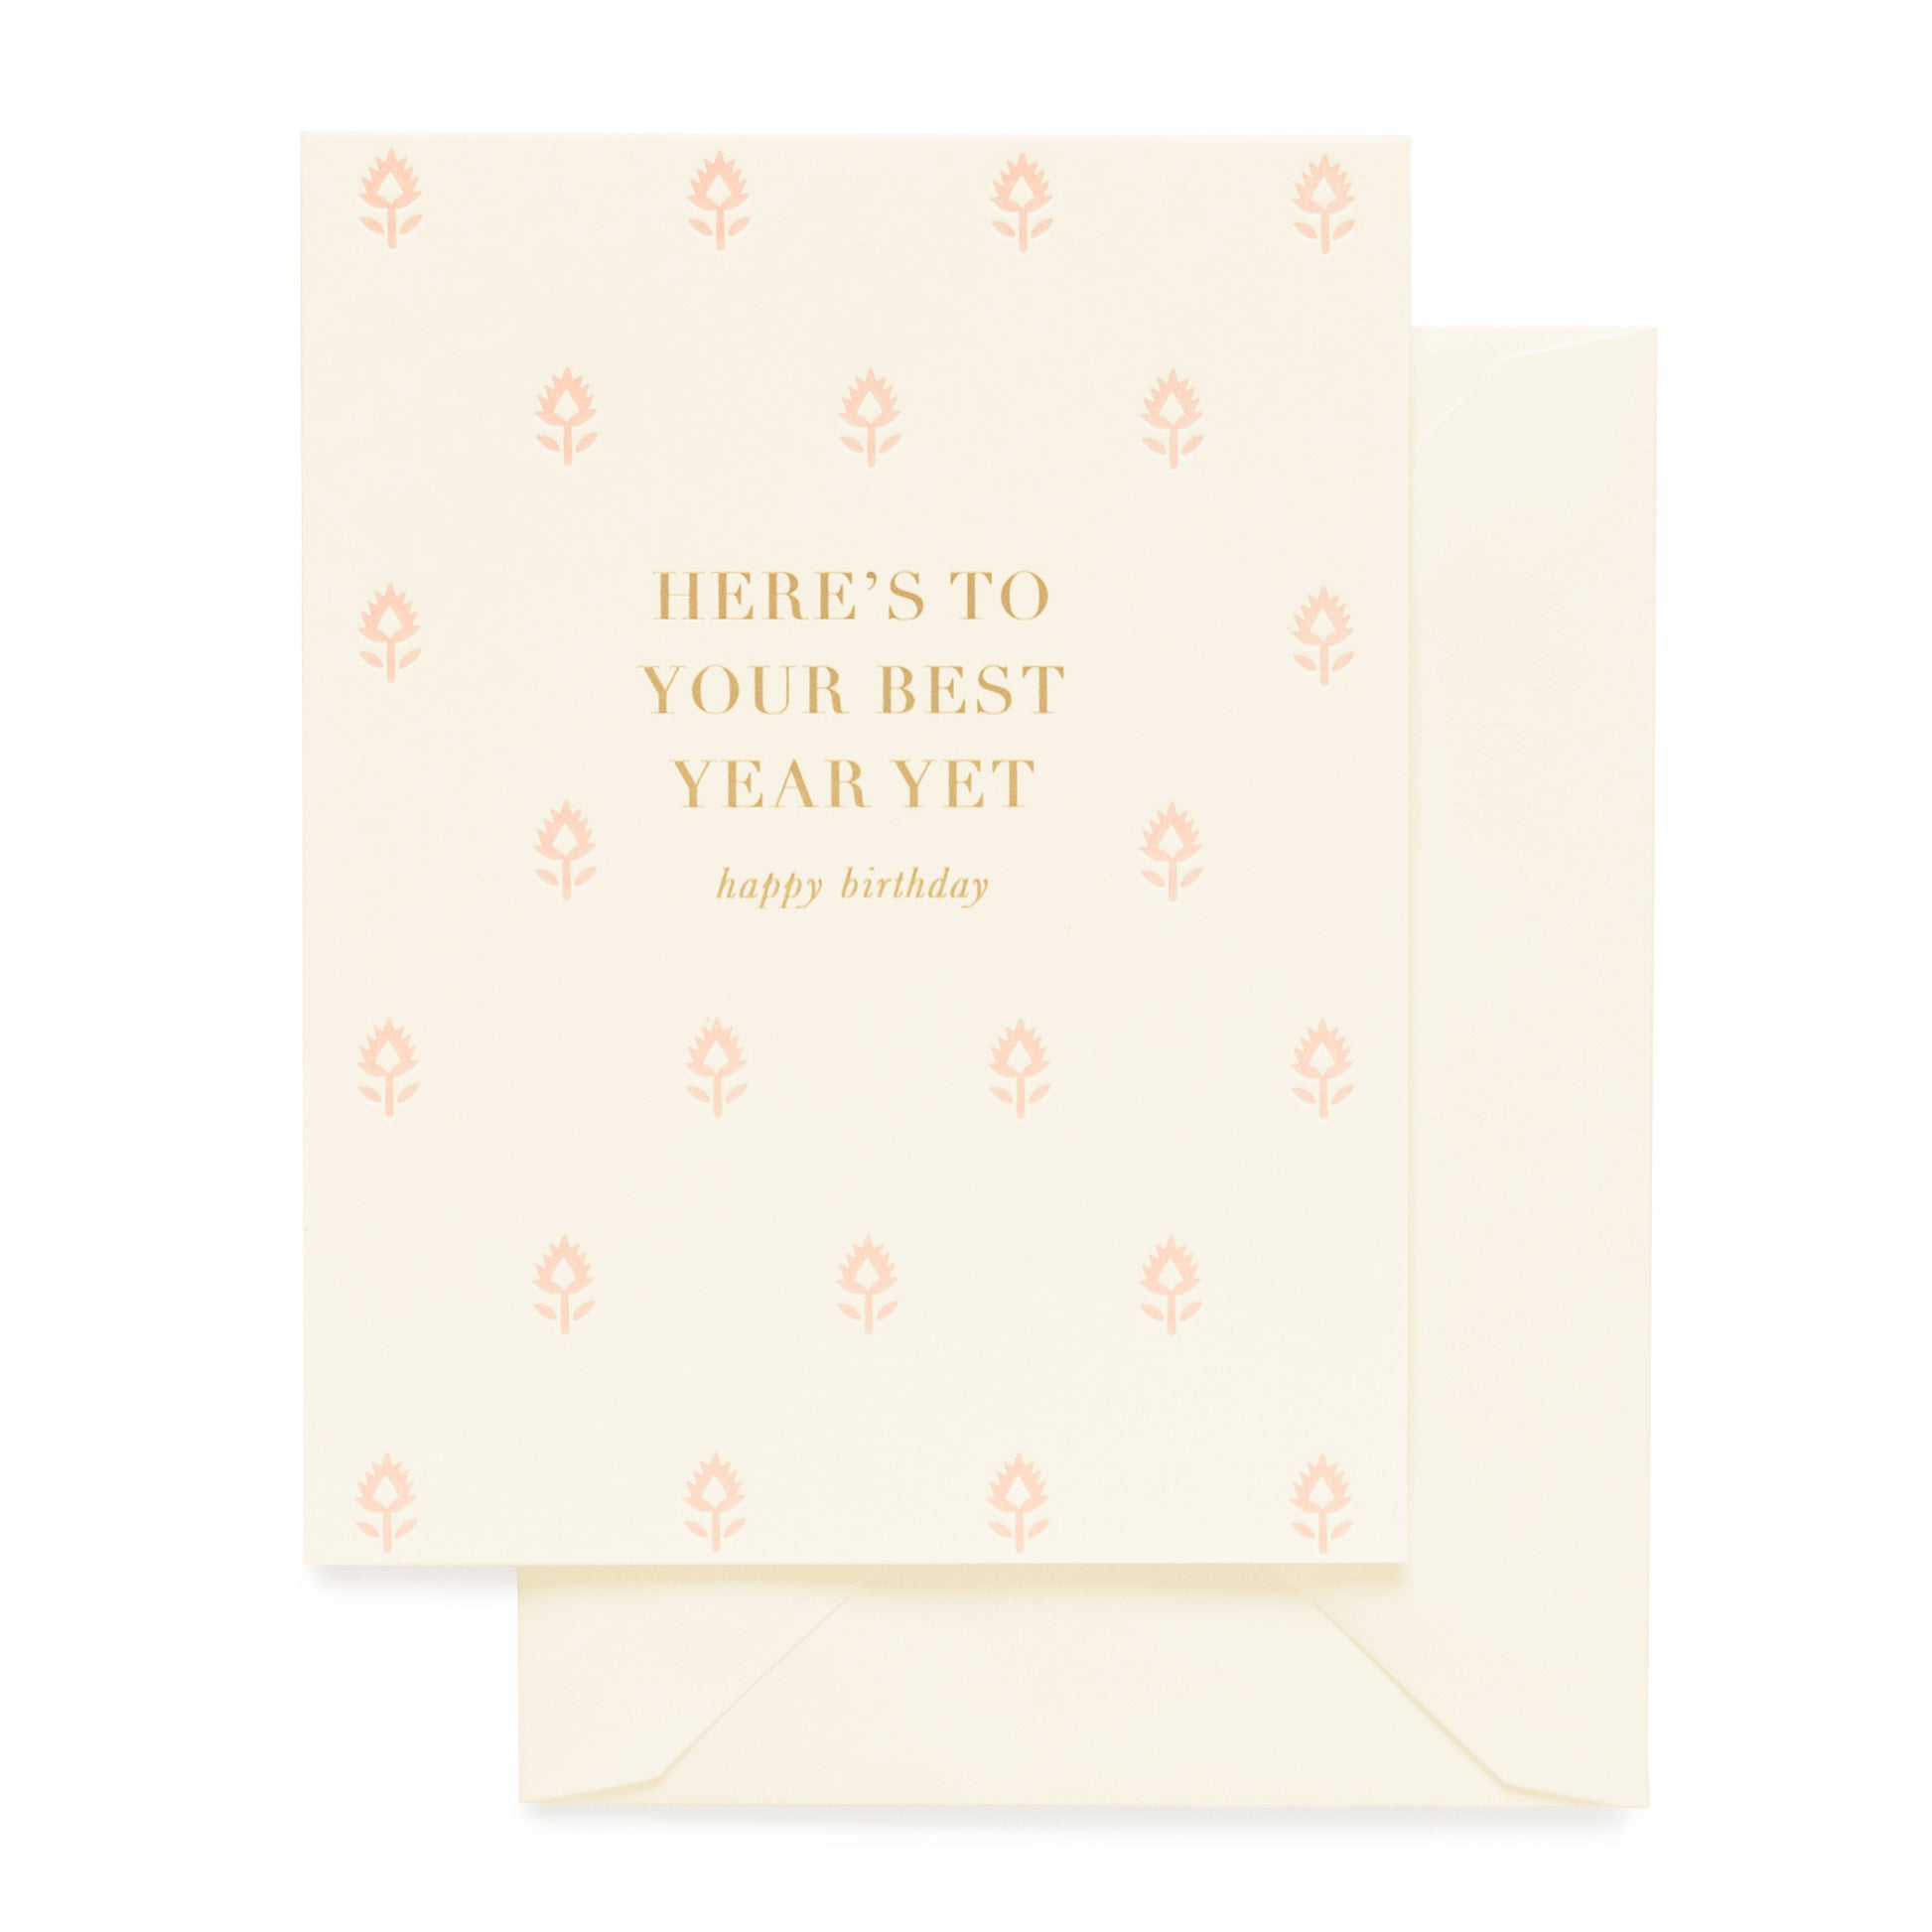 Cream, Pink and Gold Birthday Card with Here's To Your Best Year Yet printed